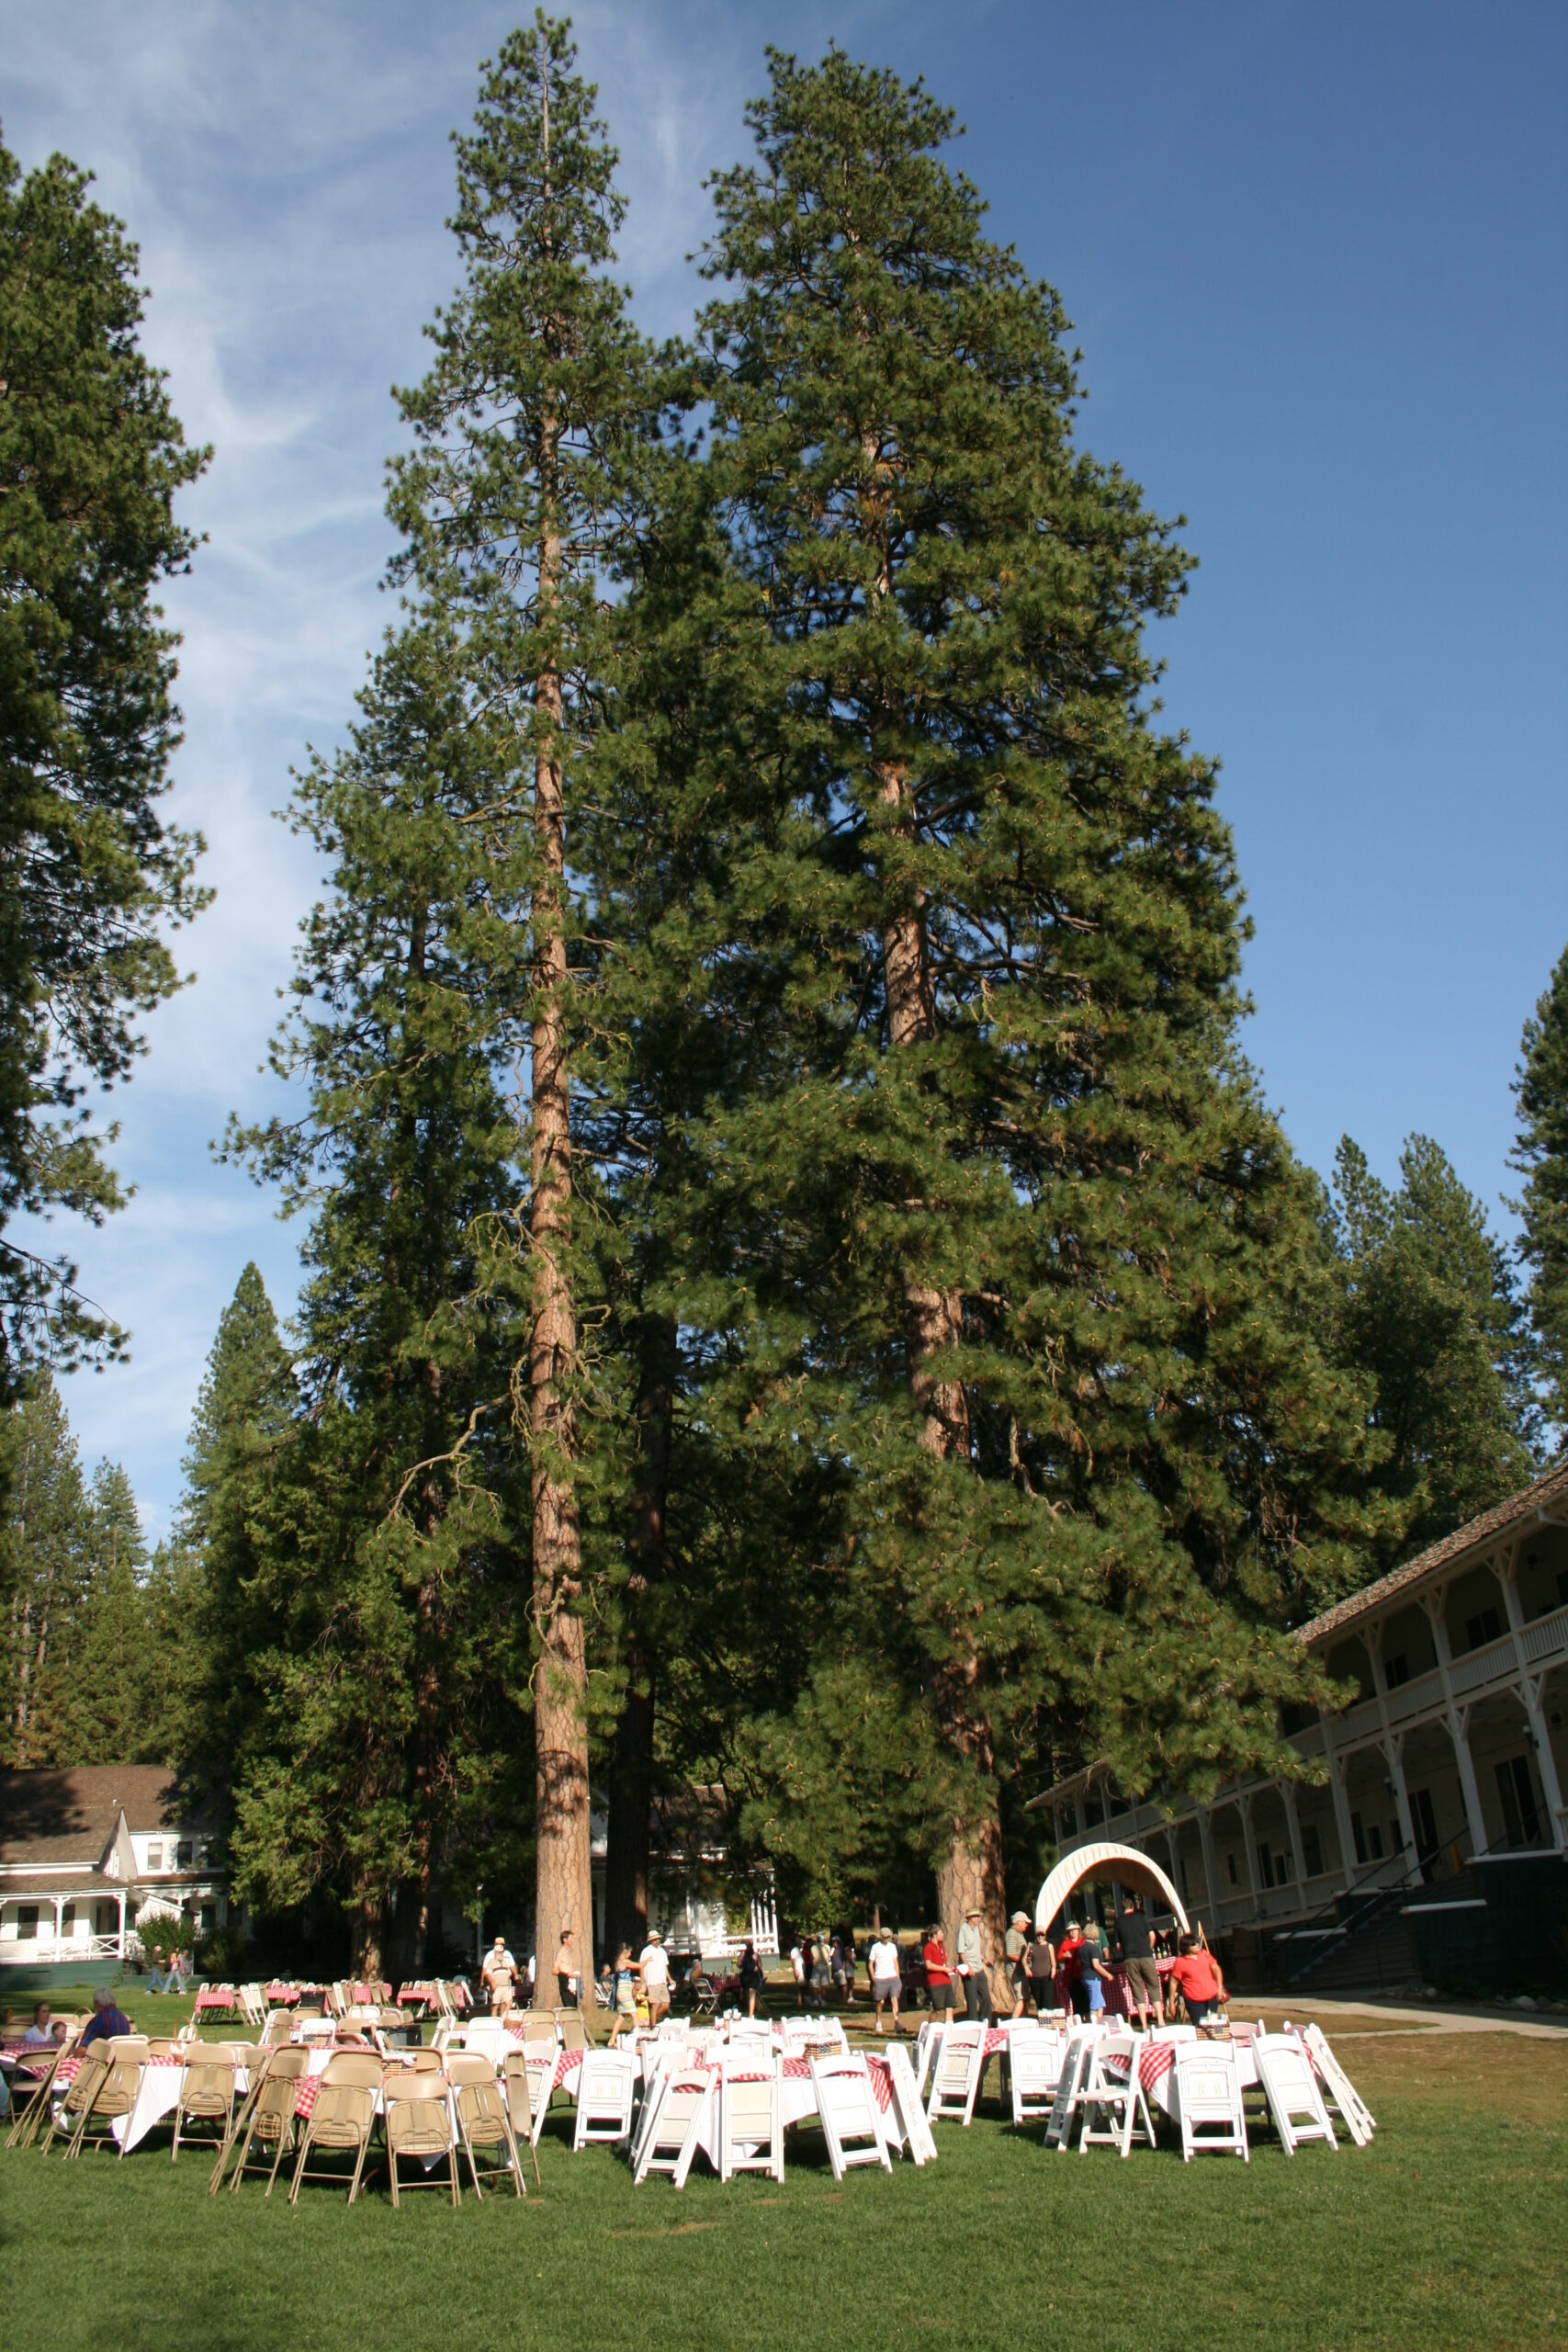 Chairs and tables sit below Sequoia trees for the Wawona Hotel Lawn Barbecue in Yosemite National Park.